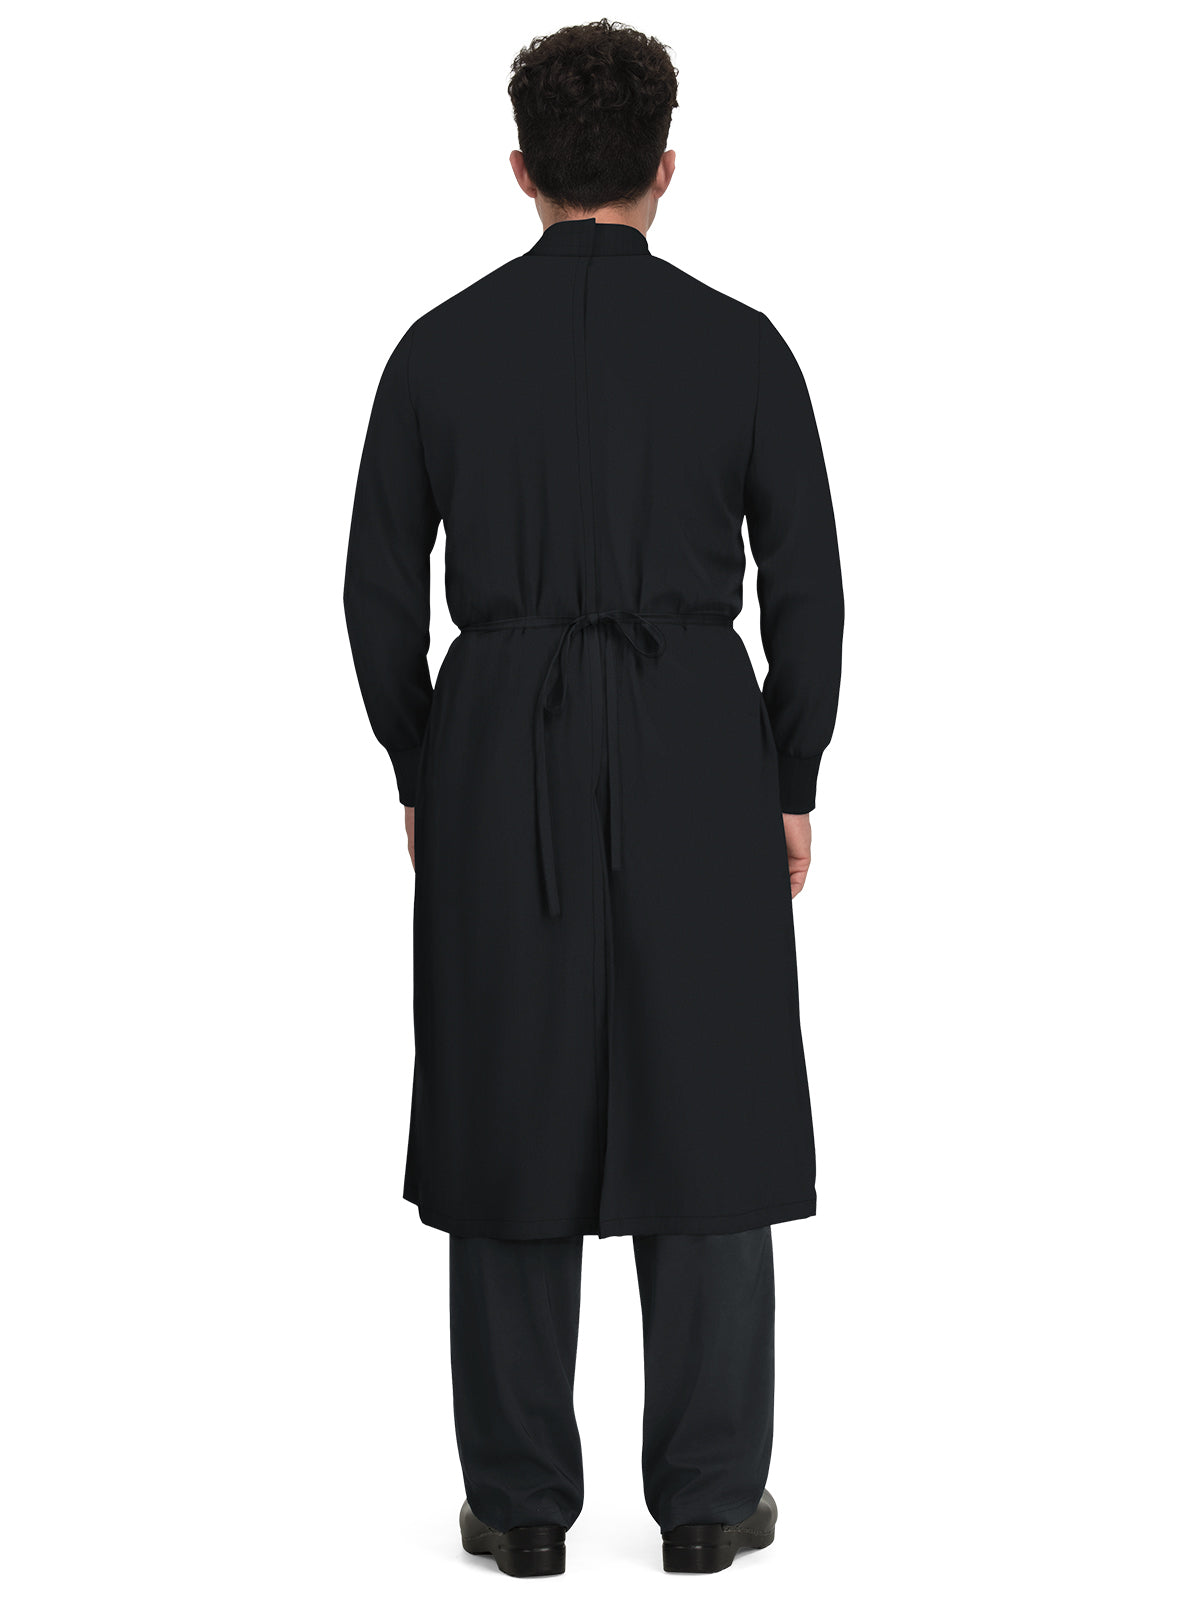 Unisex Clinical Gown